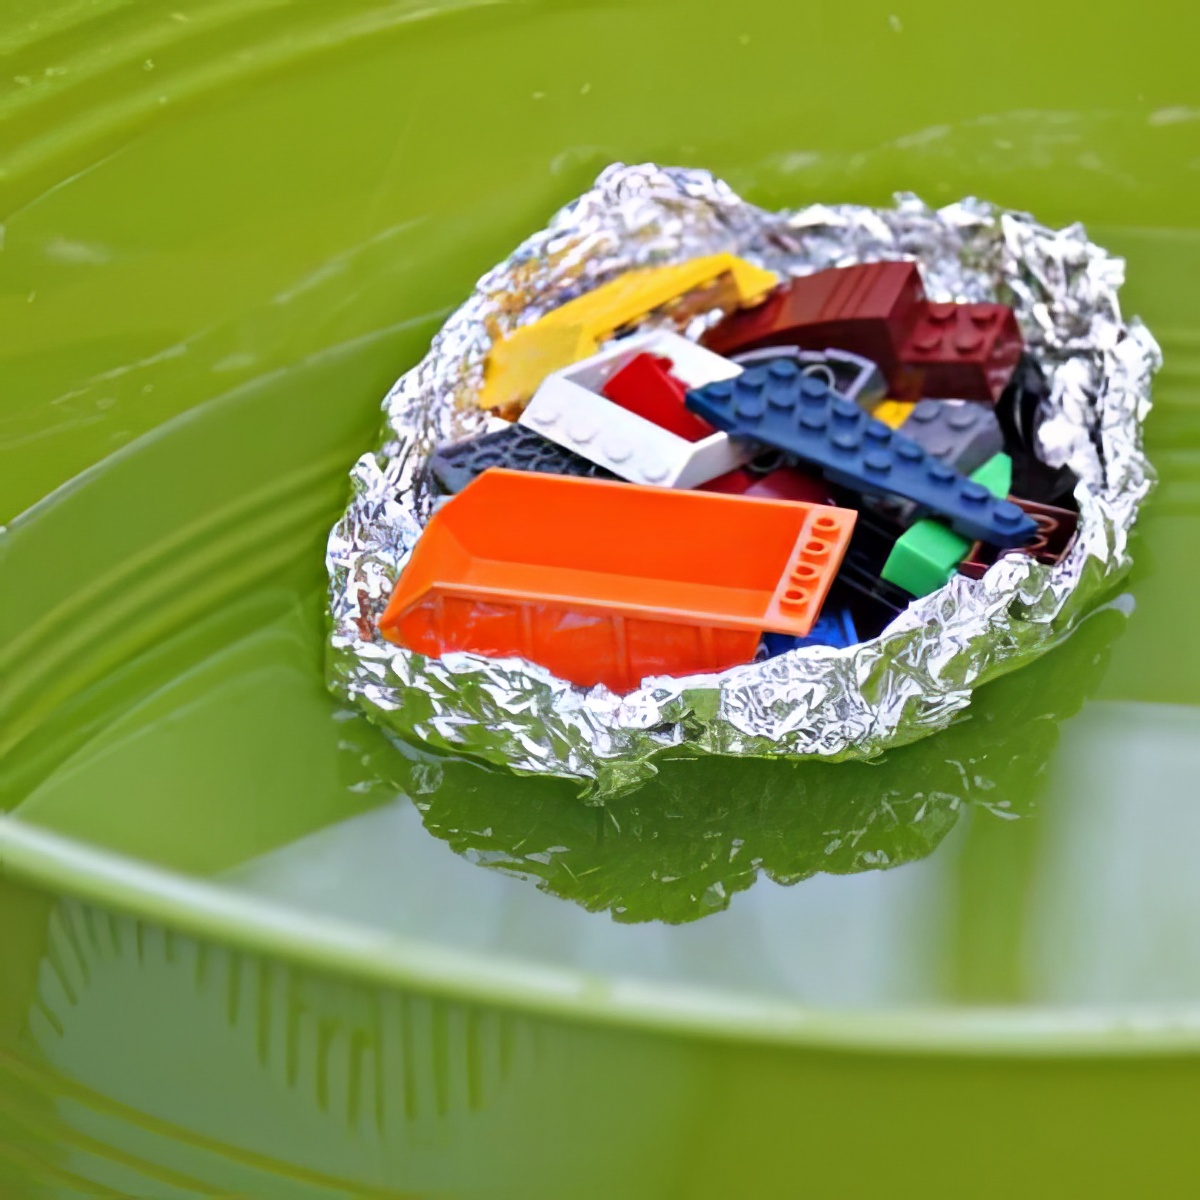 sink and float, LEGO boat float, creative science experiment, LEGO science experiment